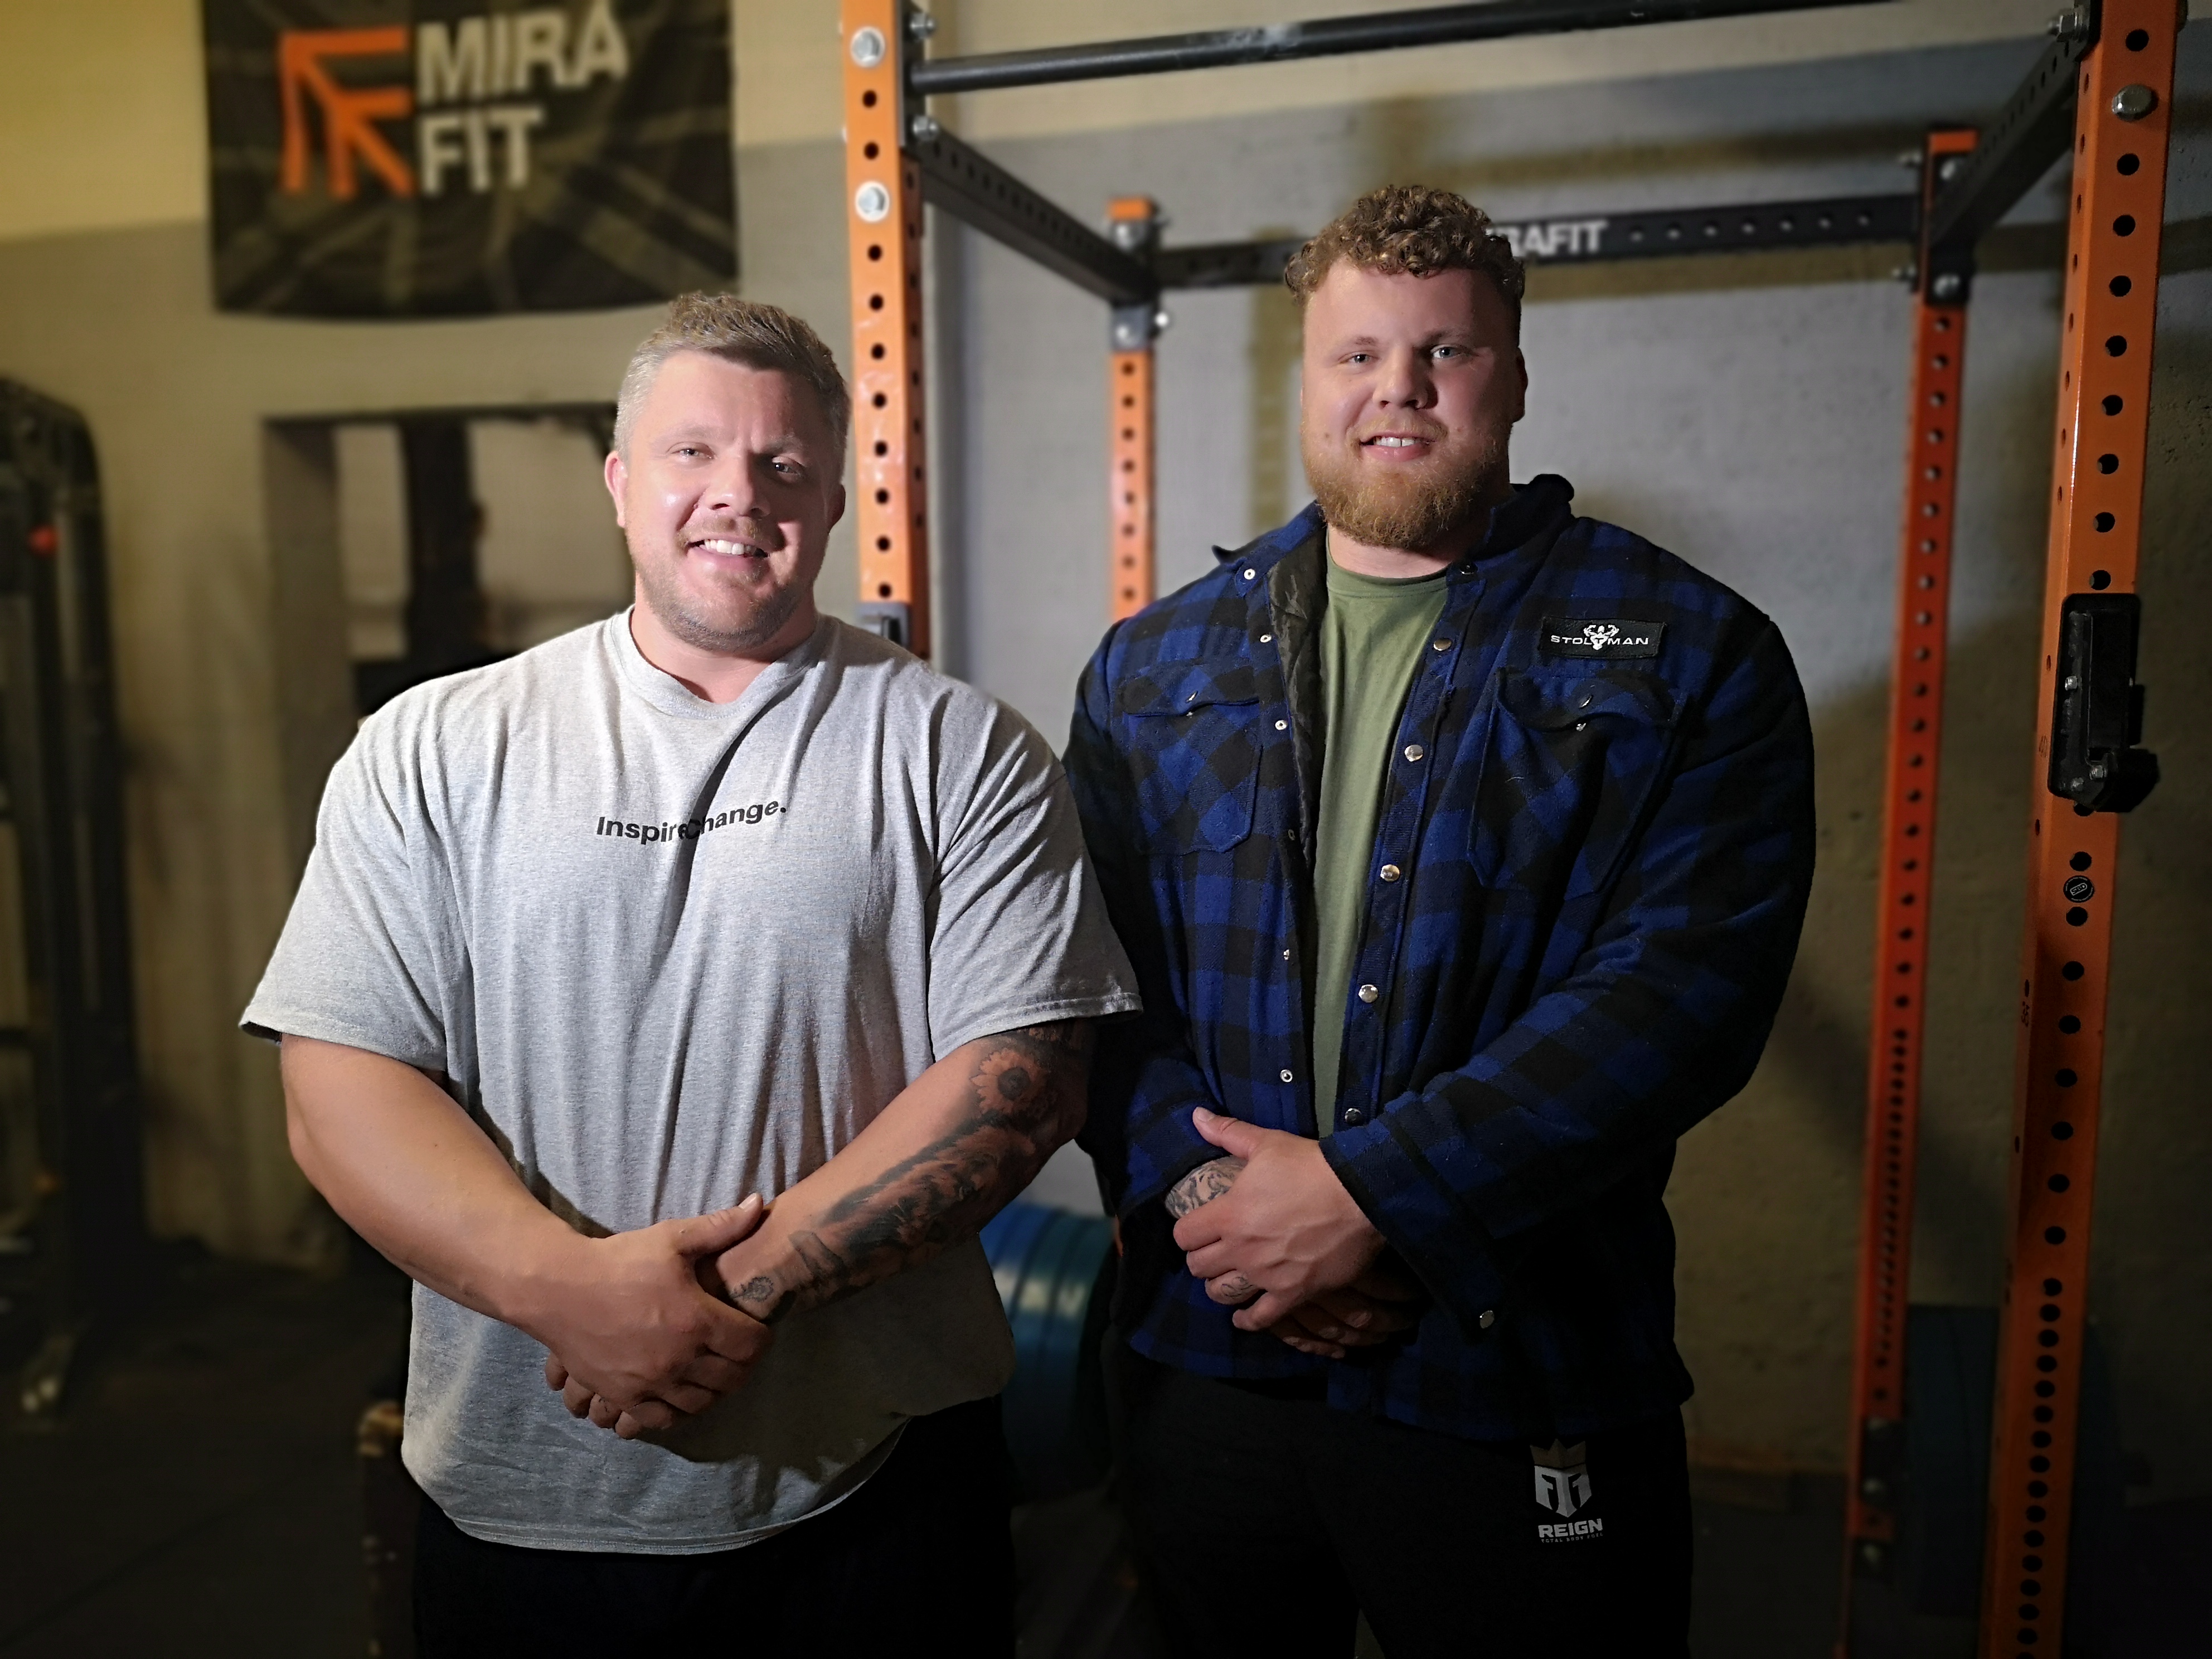 Tom (right) and Luke (left) are delighted to be the World's Strongest brothers